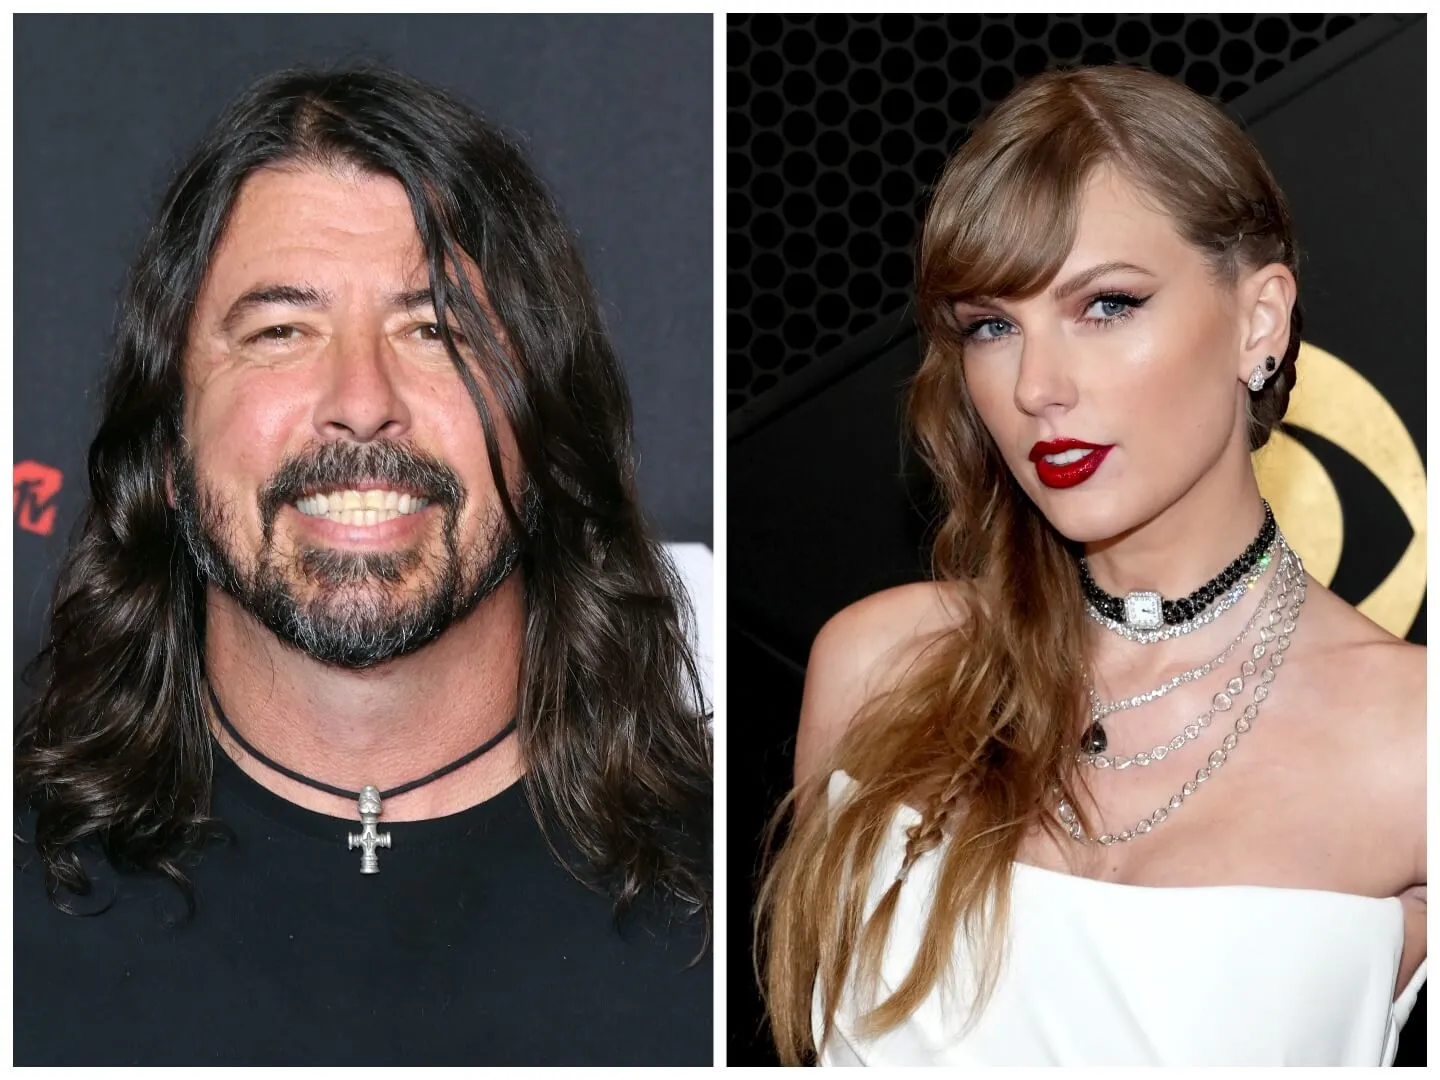 Dave Grohl wears a black shirt with a necklace. Taylor Swift wears a white strapless dress and multiple necklaces.